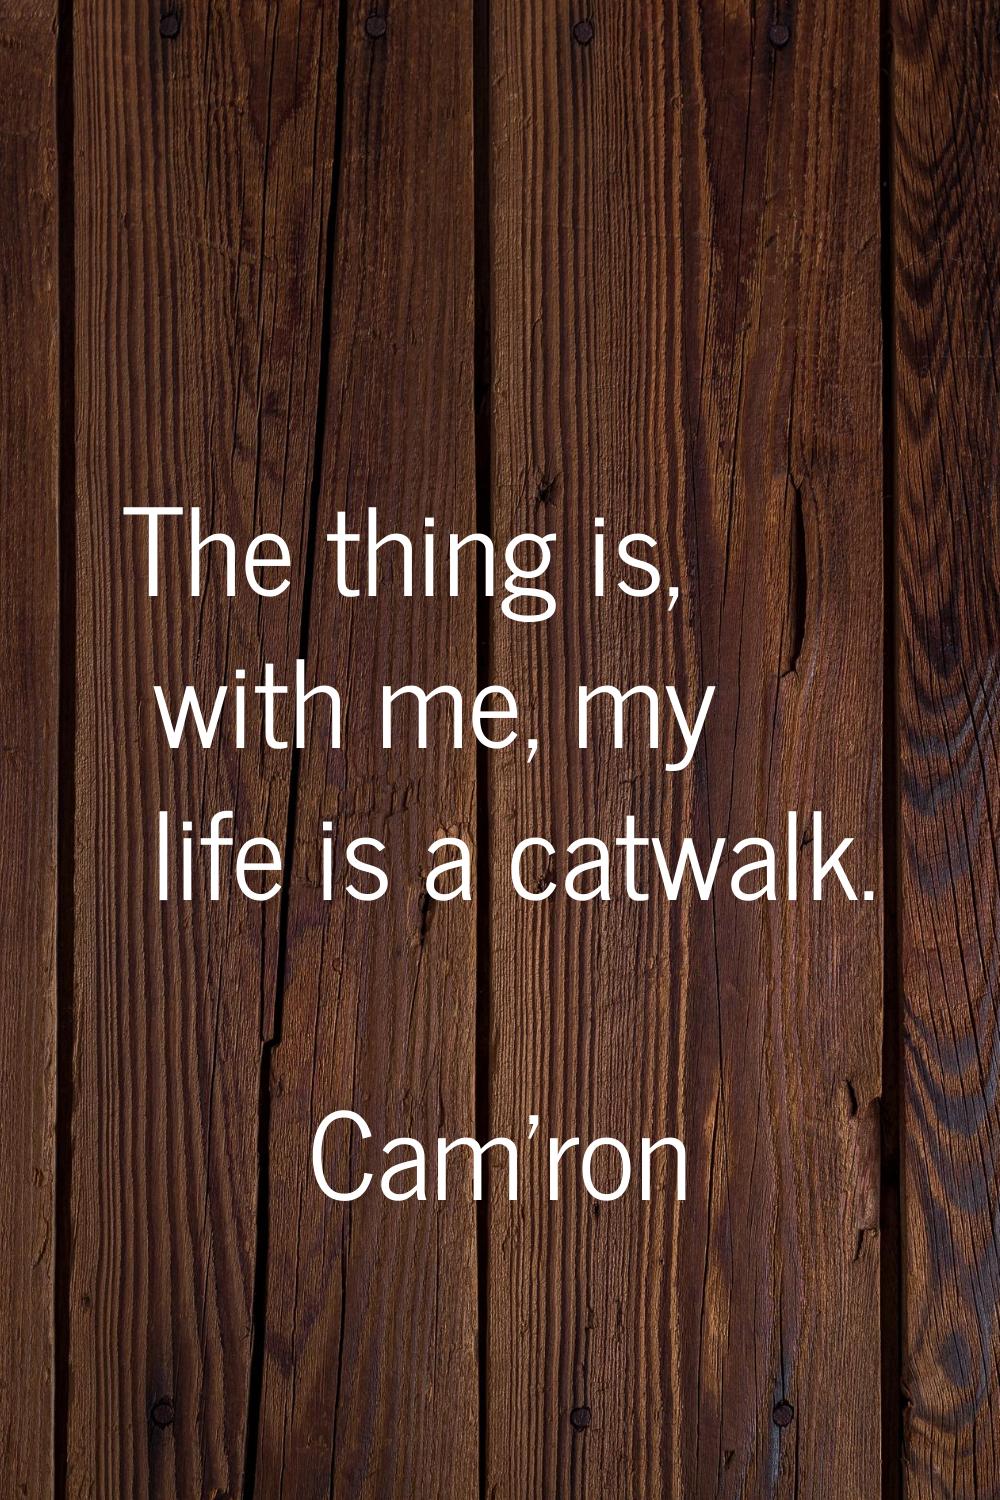 The thing is, with me, my life is a catwalk.